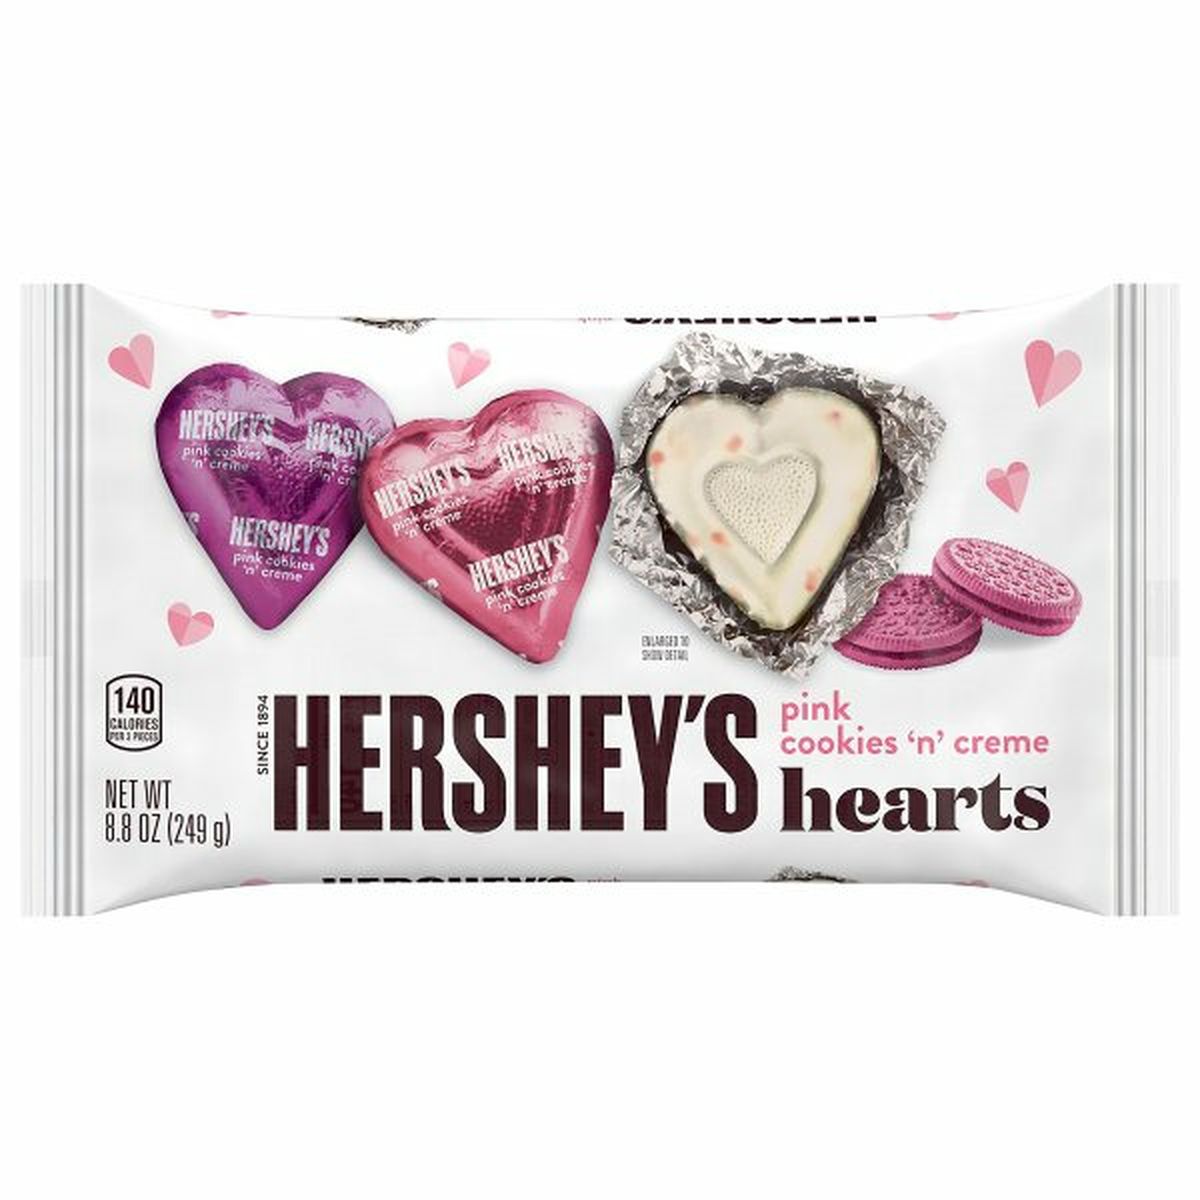 Calories in Hershey's Candy, Hearts, Pink Cookies N' Creme